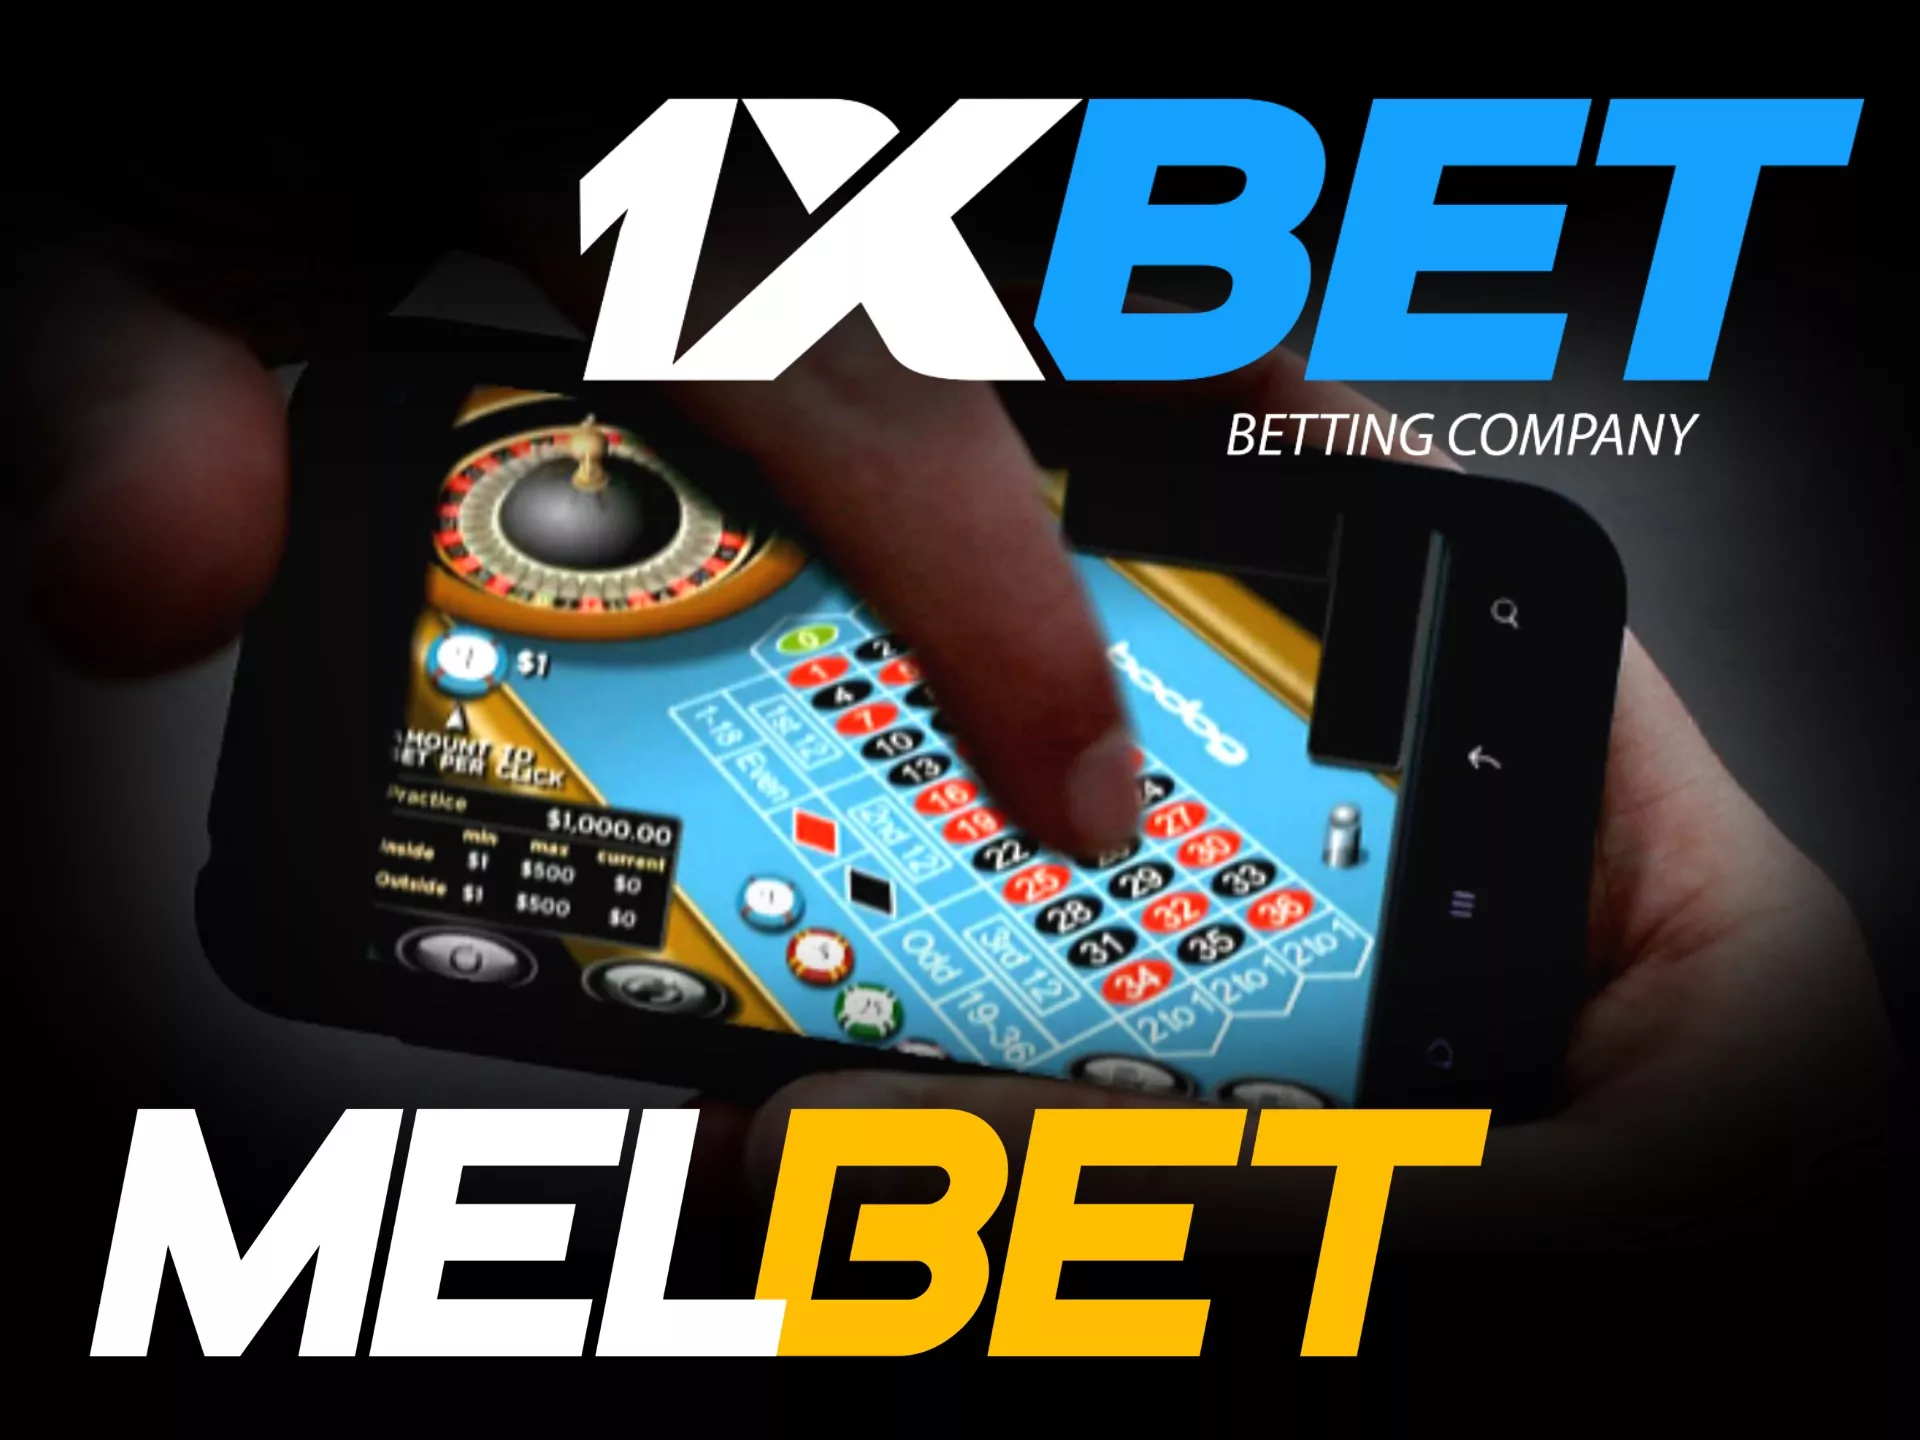 If you play casino games at 1xBet or Melbet you can choose PayTM as your basic payment method.